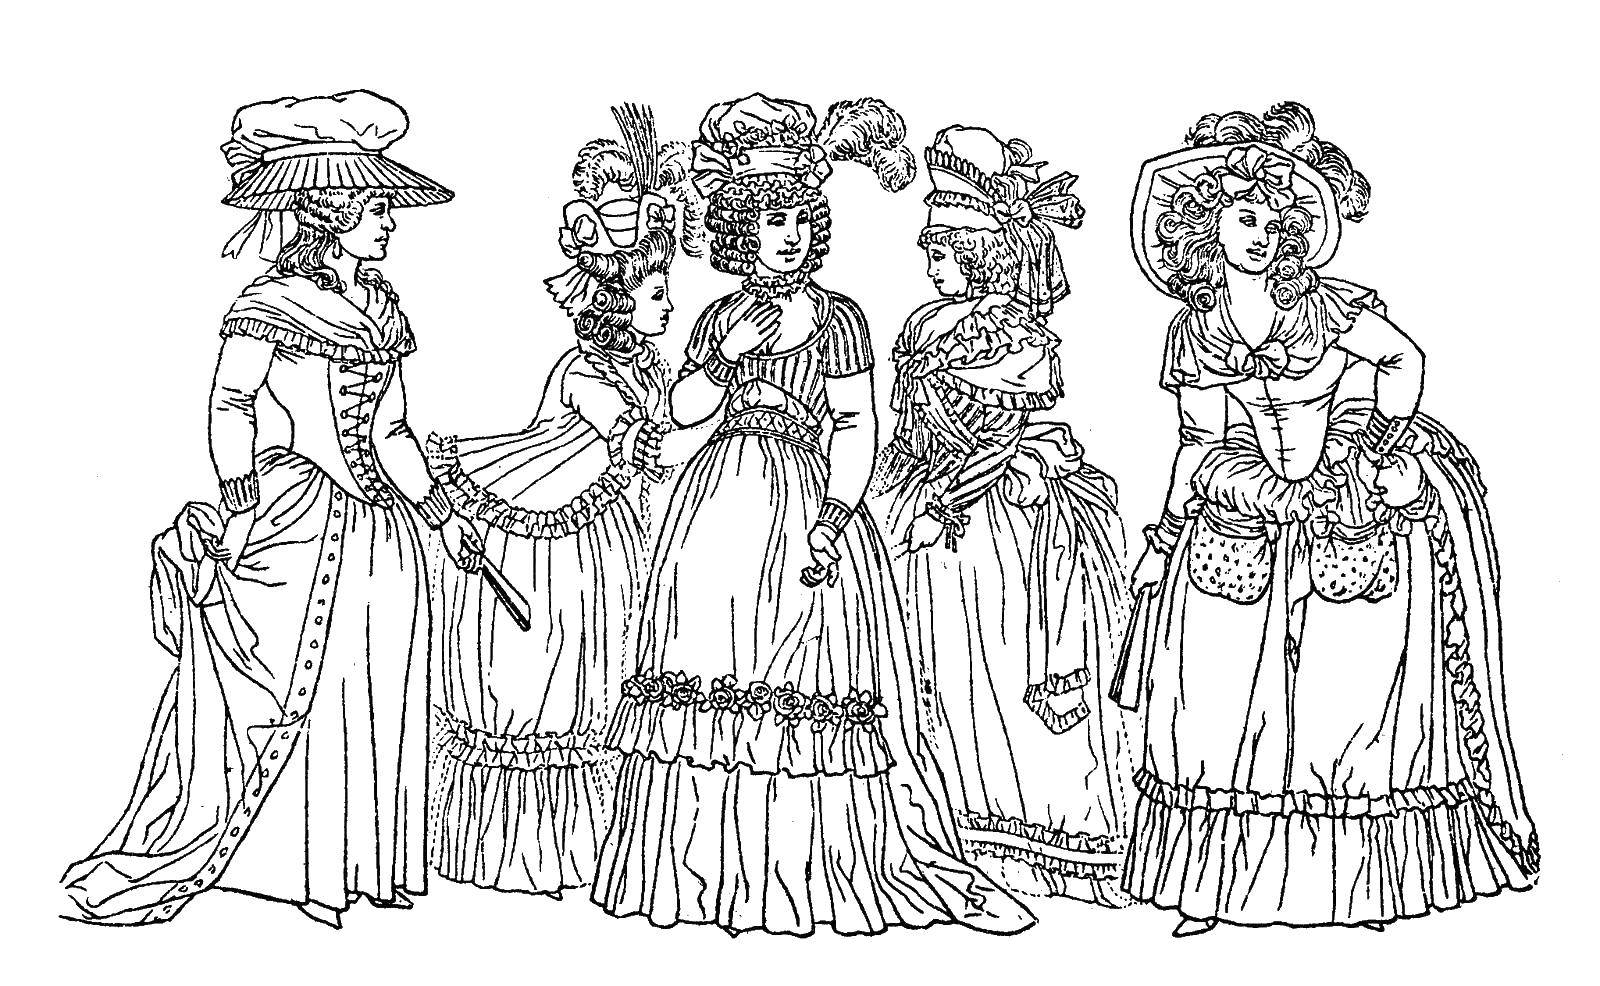 Coloring Girls in the lush dresses. Category Dress. Tags:  dresses, girls, ladies.